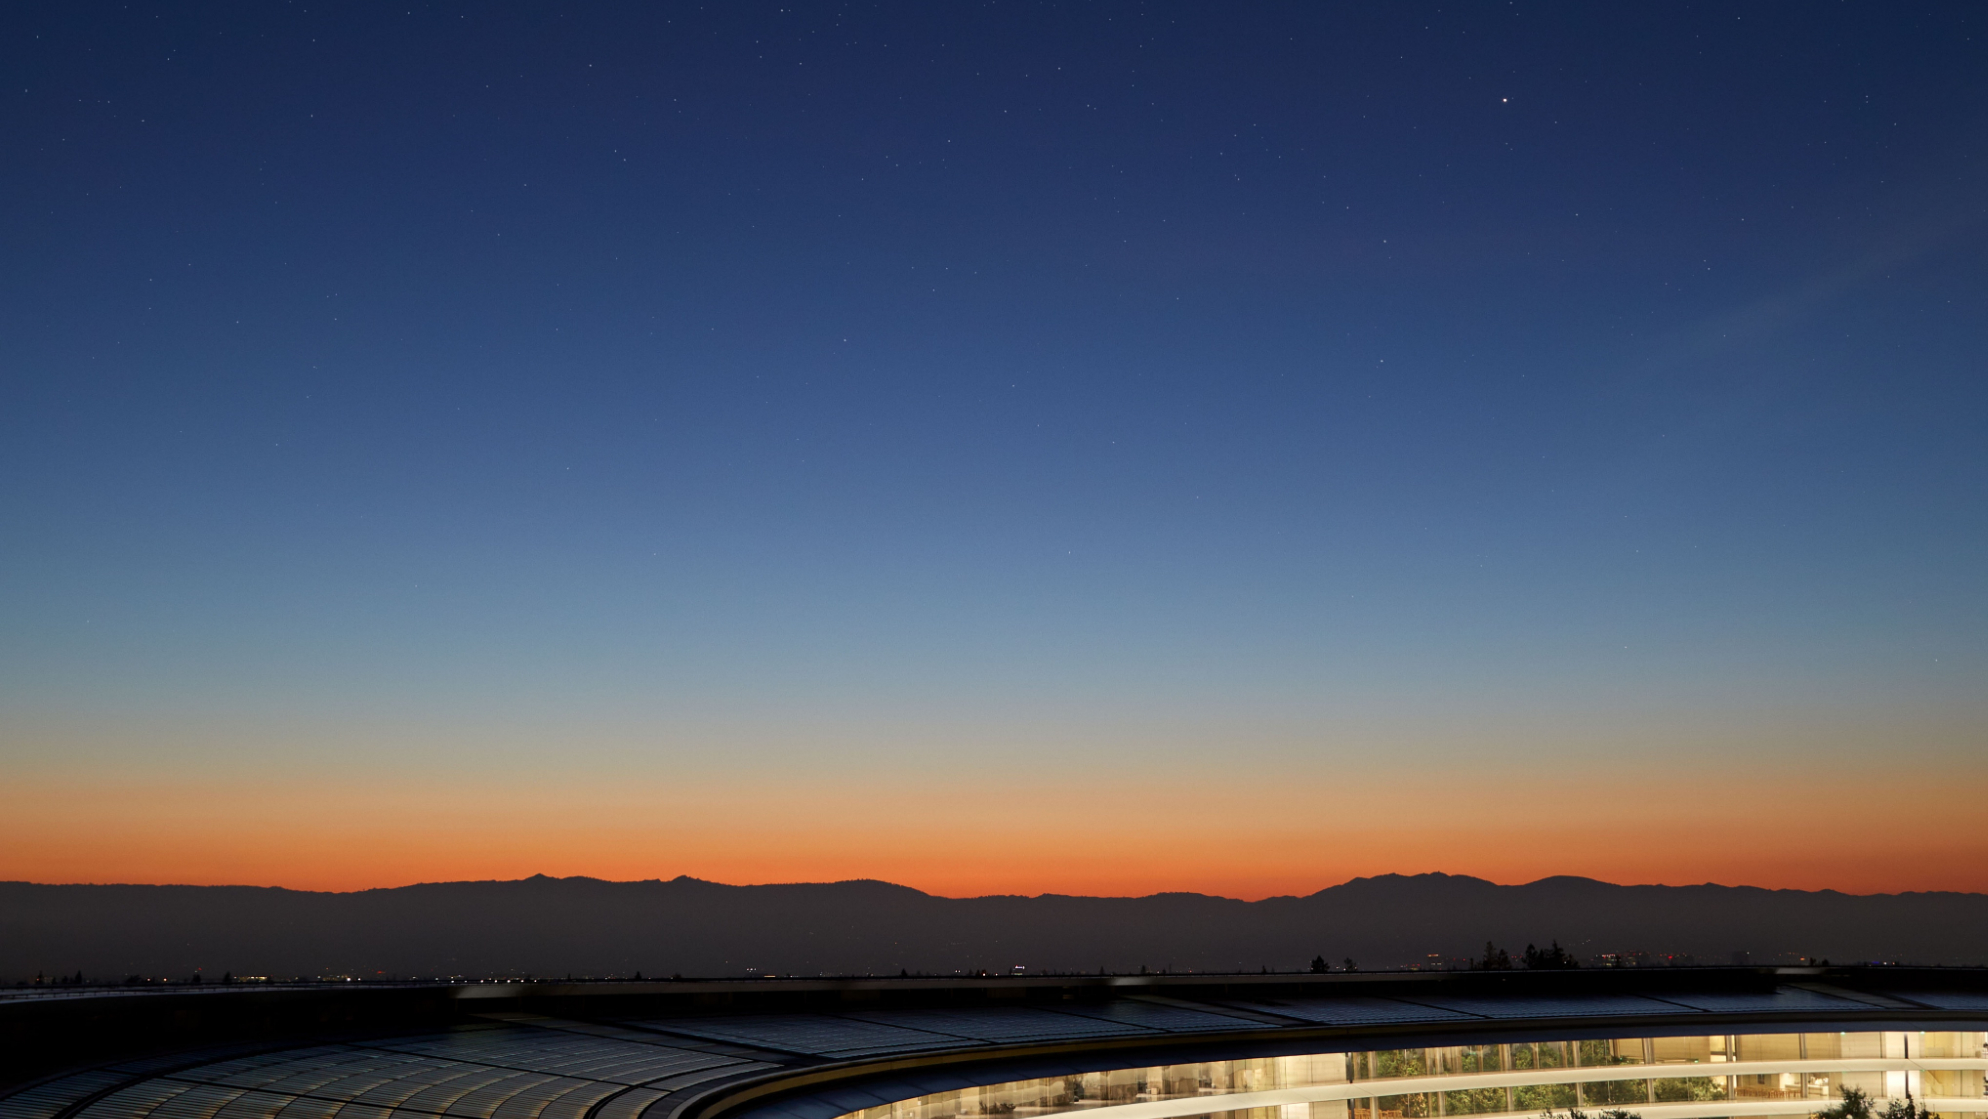 A photo of the sunrise over Apple Park on the morning of the Wonderlust launch event